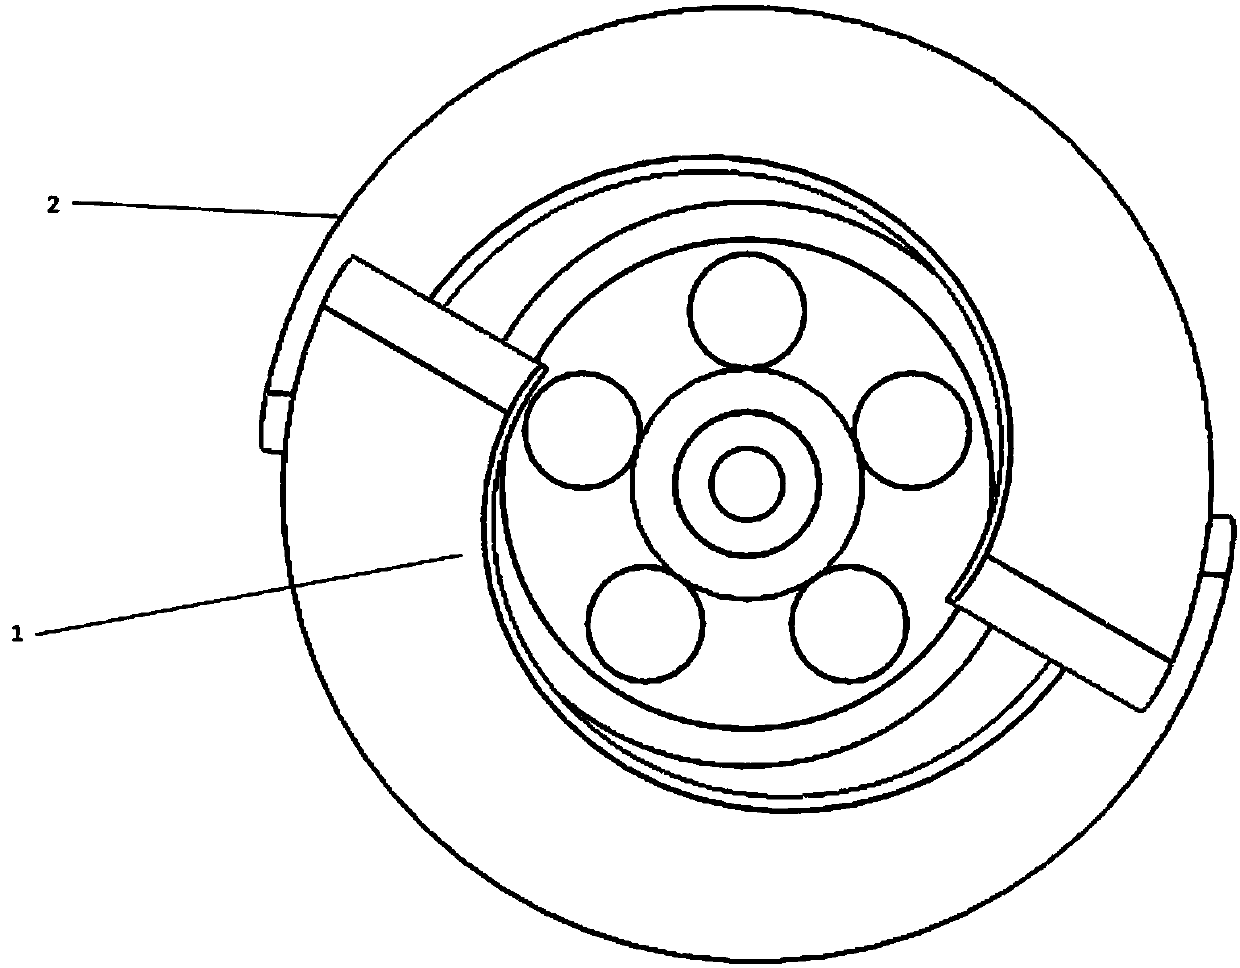 Line gear mechanism with variable angle drive